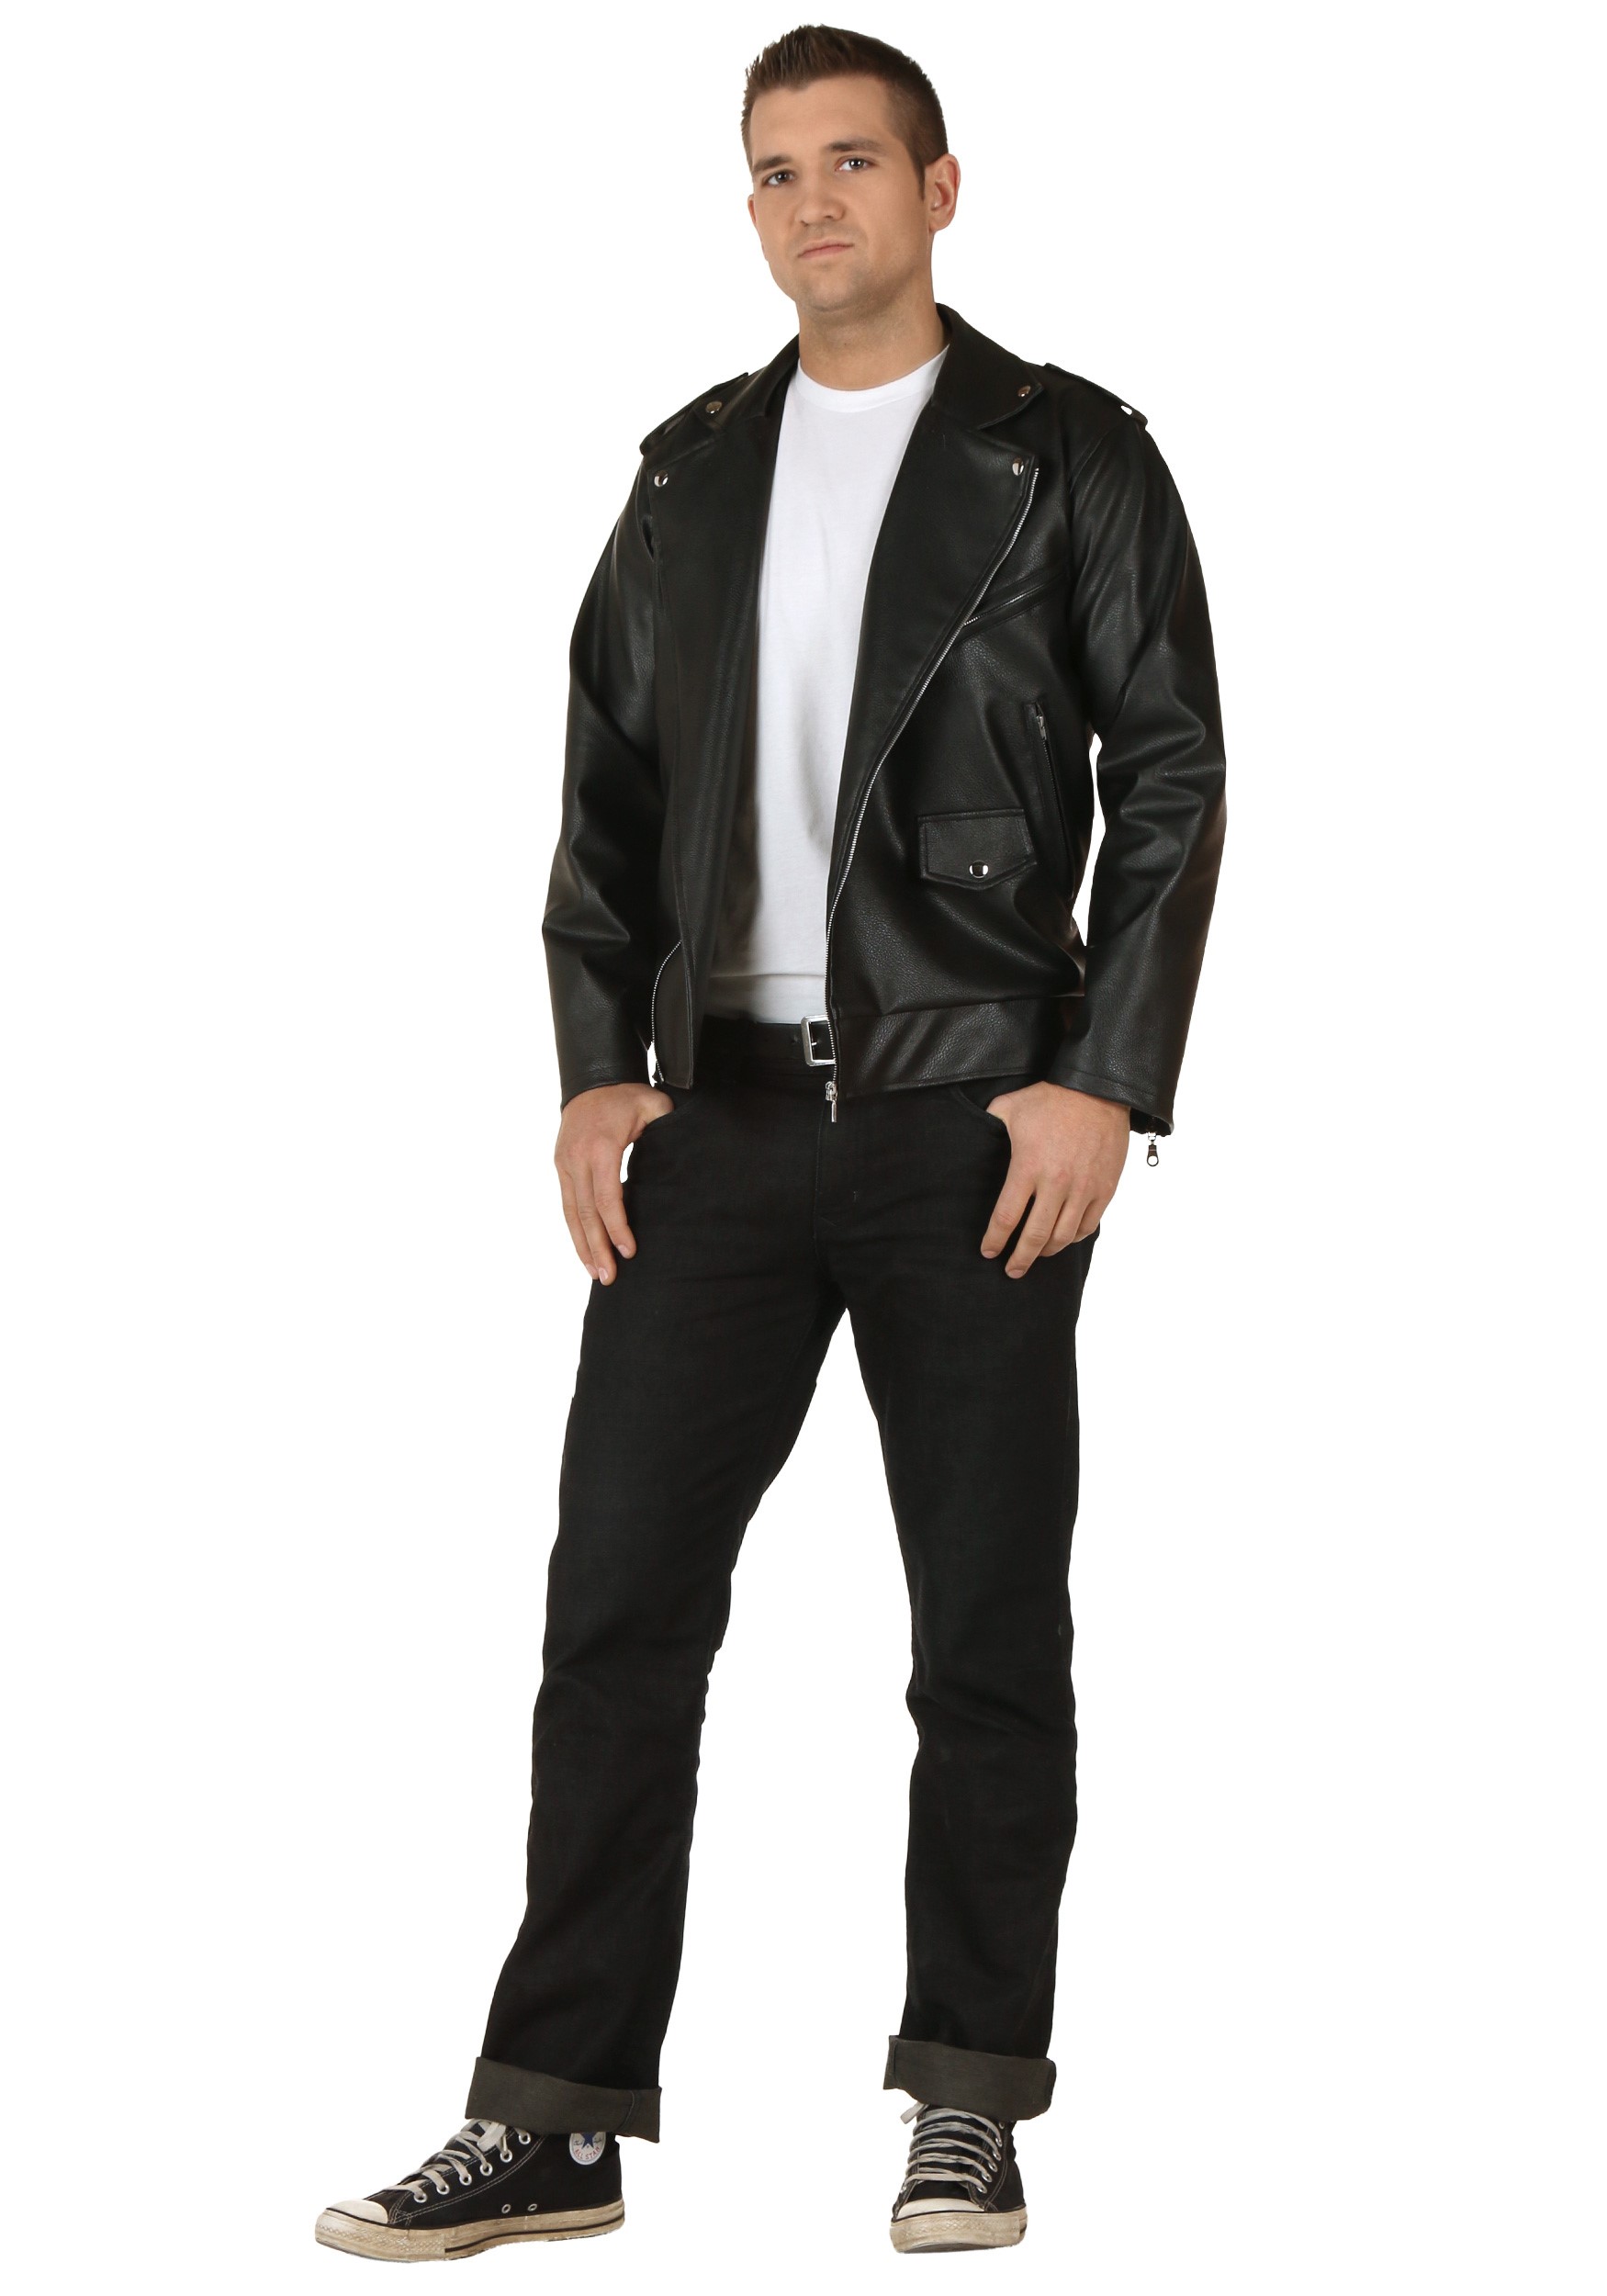 Plus Size Grease Authentic T-Birds Jacket Costume , Exclusive